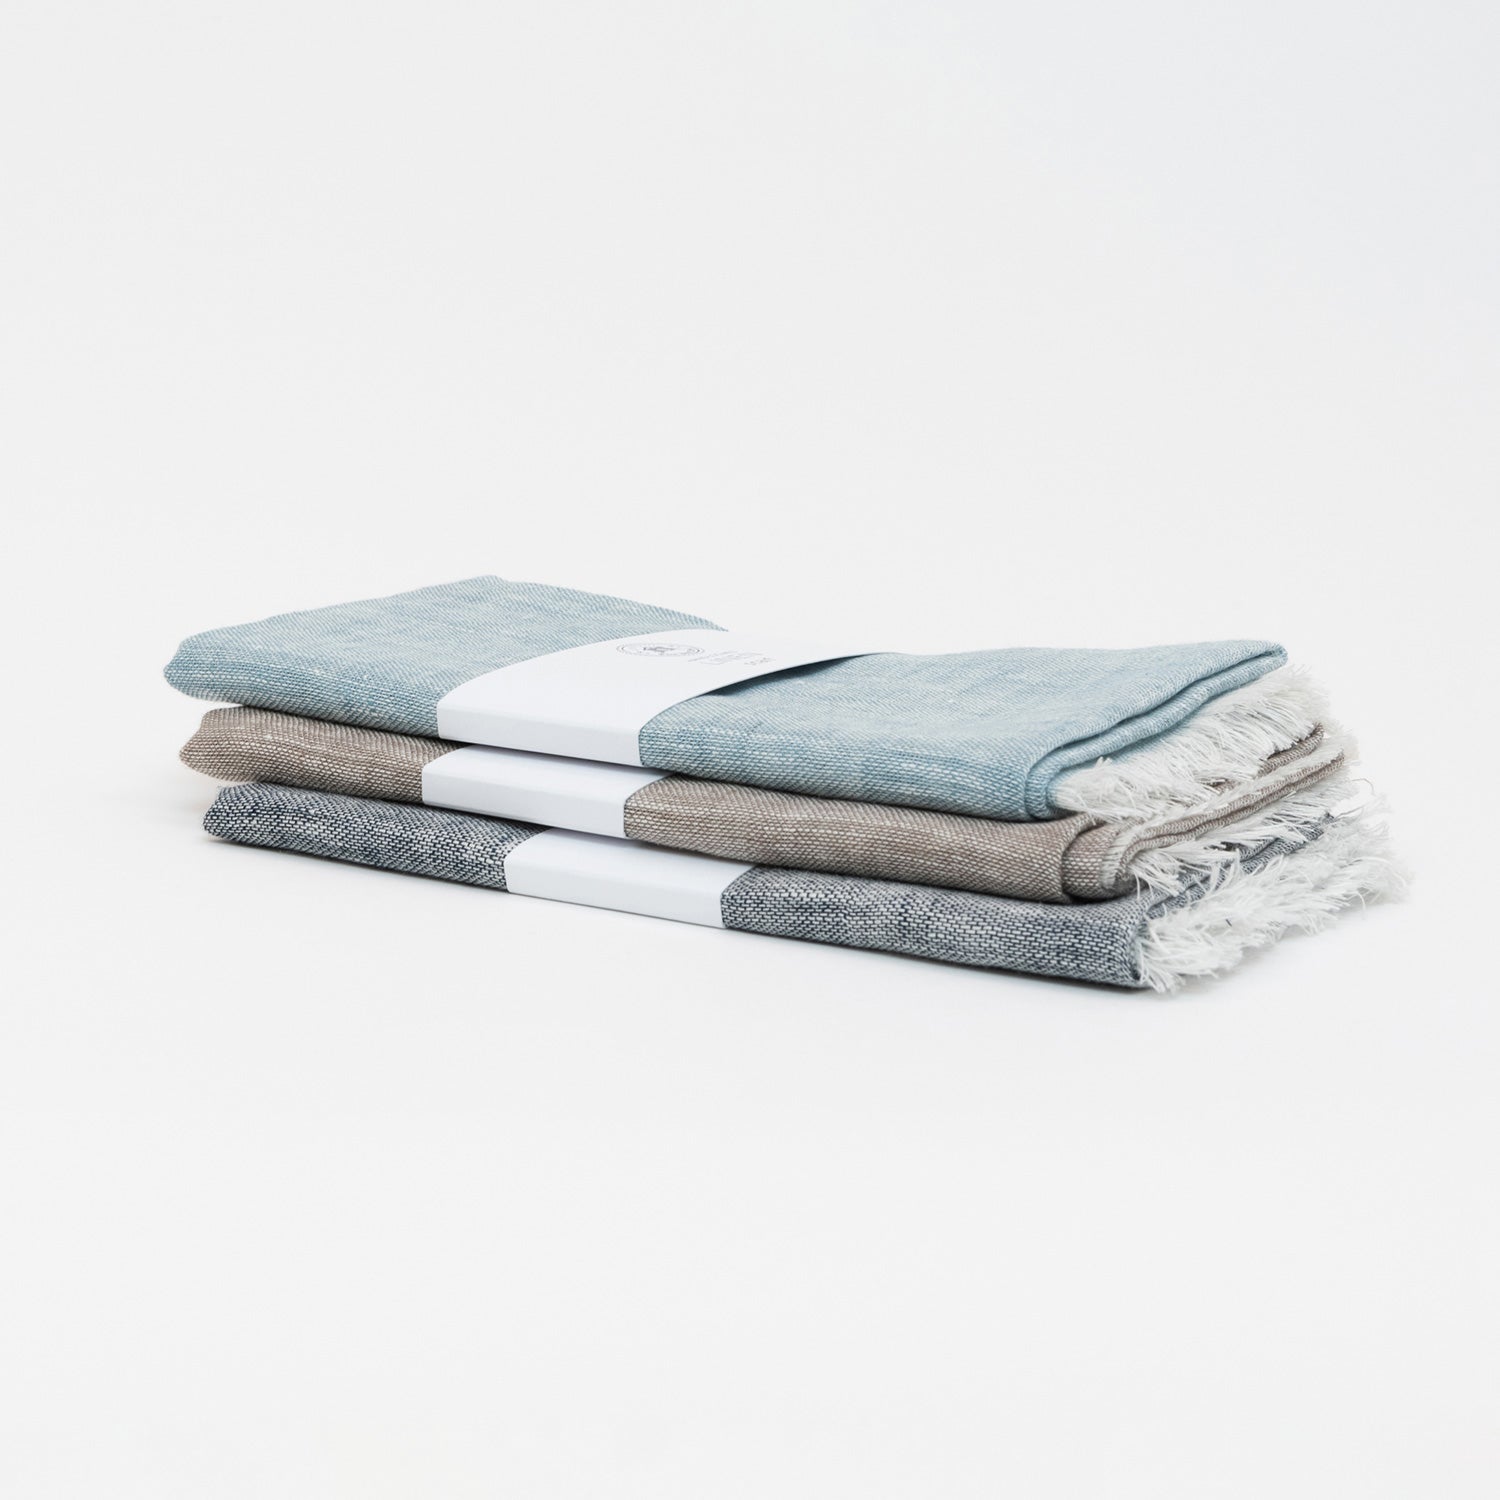 A photo of three linen scarf colour variants piled on top of each other. Denim blue, sand, and sea blue.